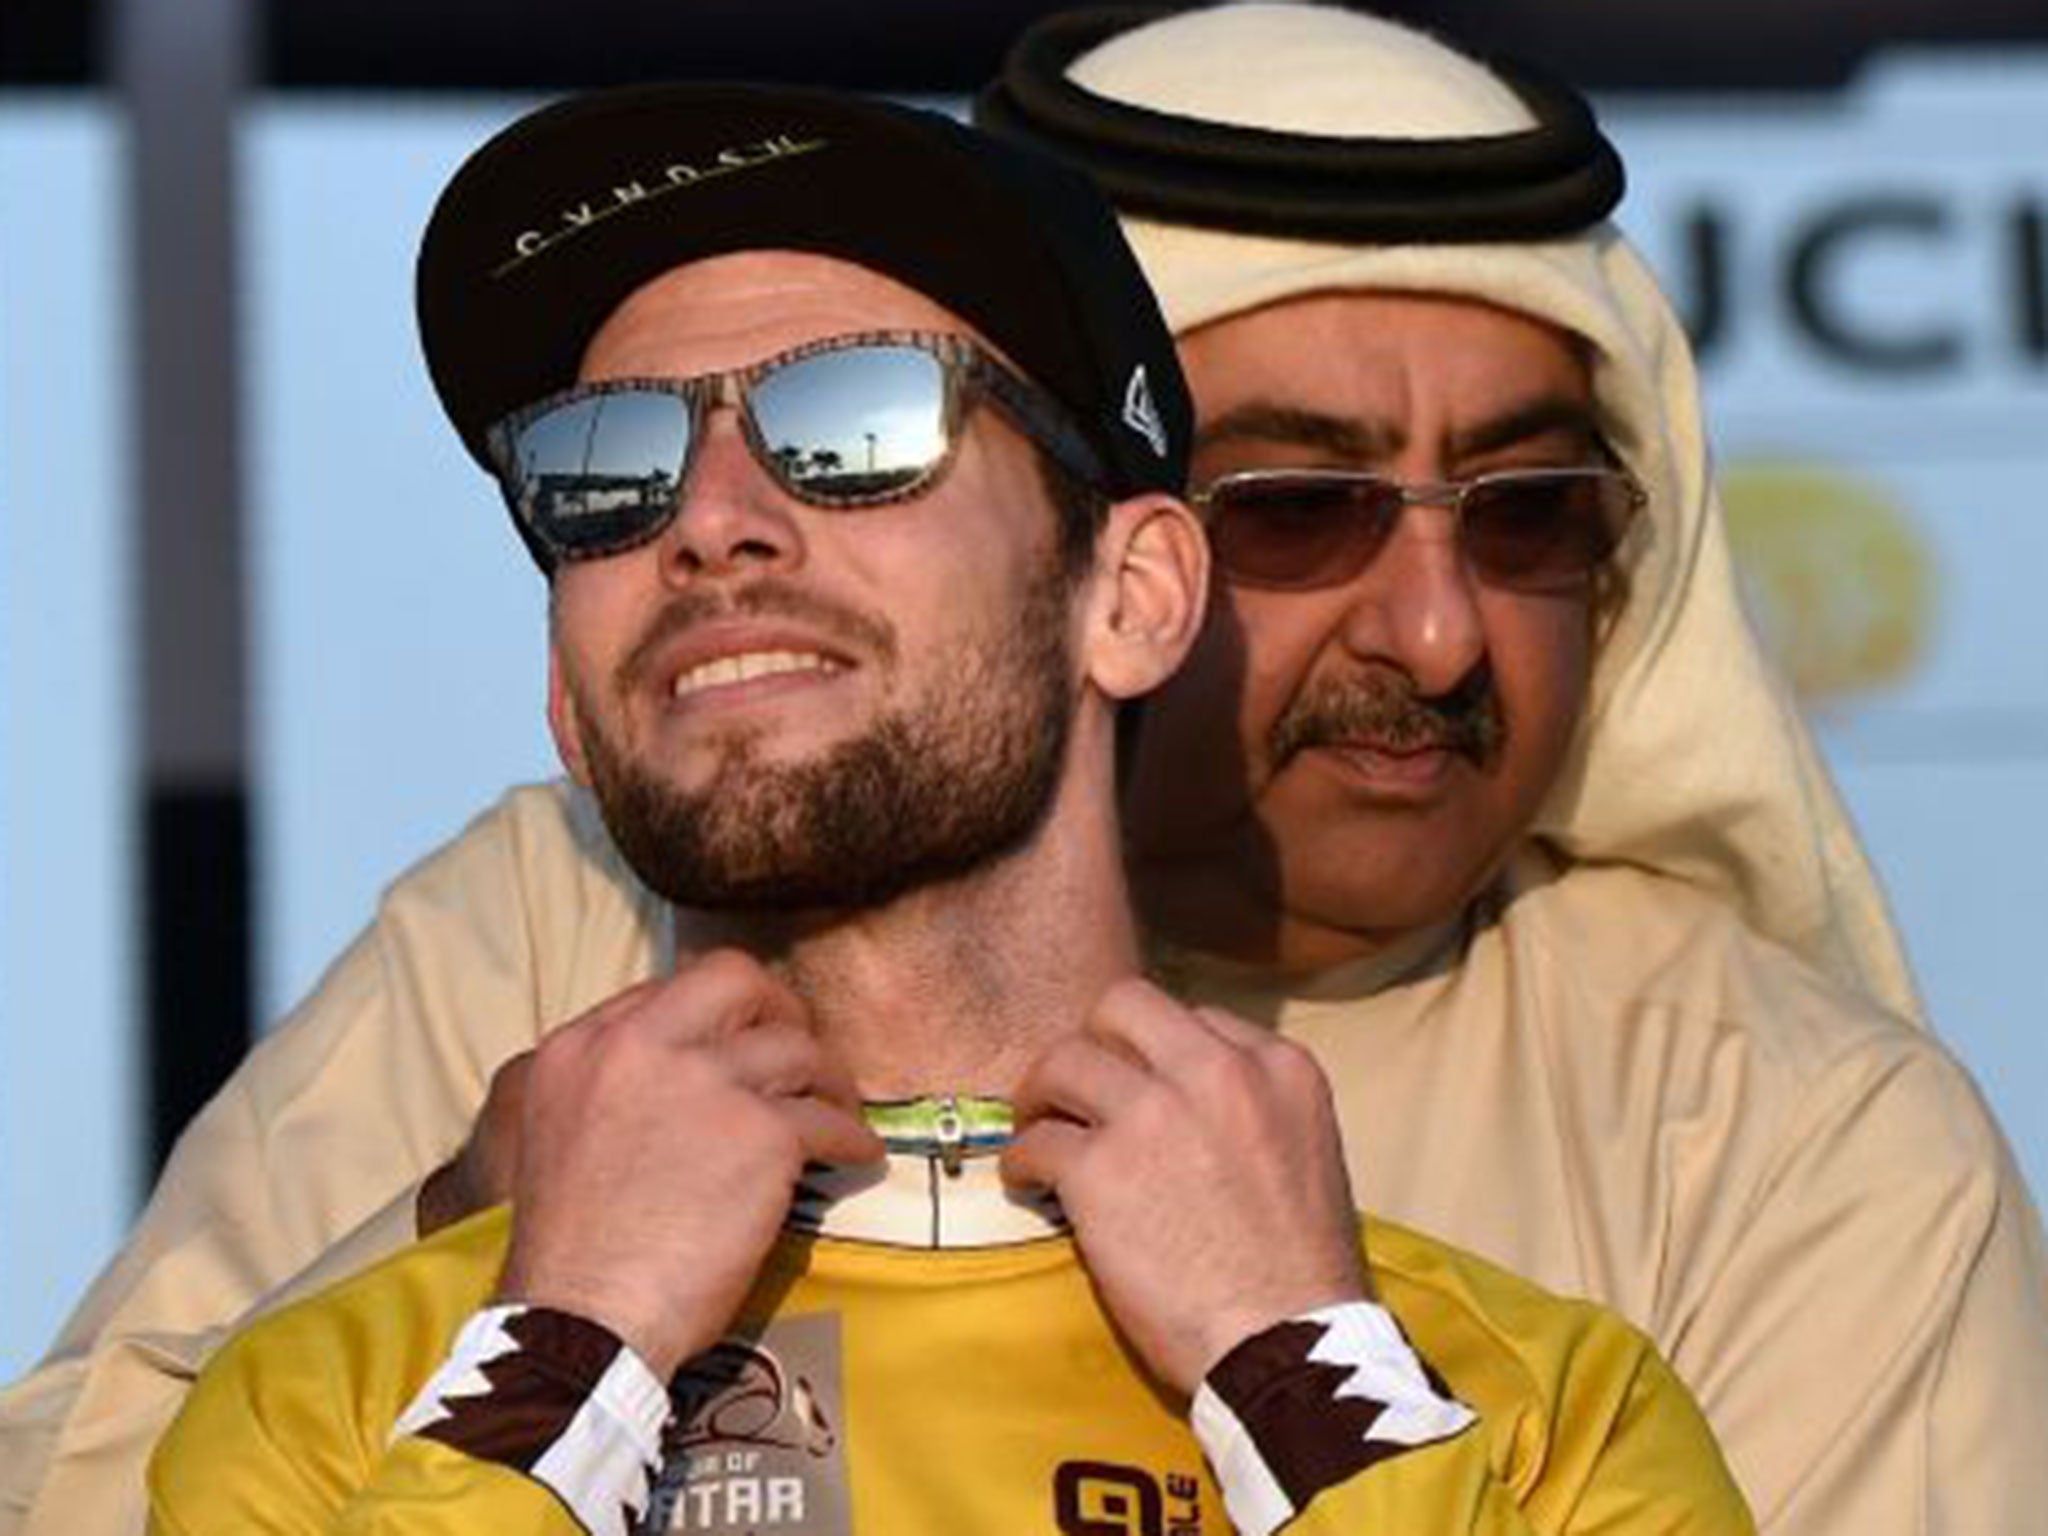 Mark Cavendish receives the winner’s gold jersey in Qatar